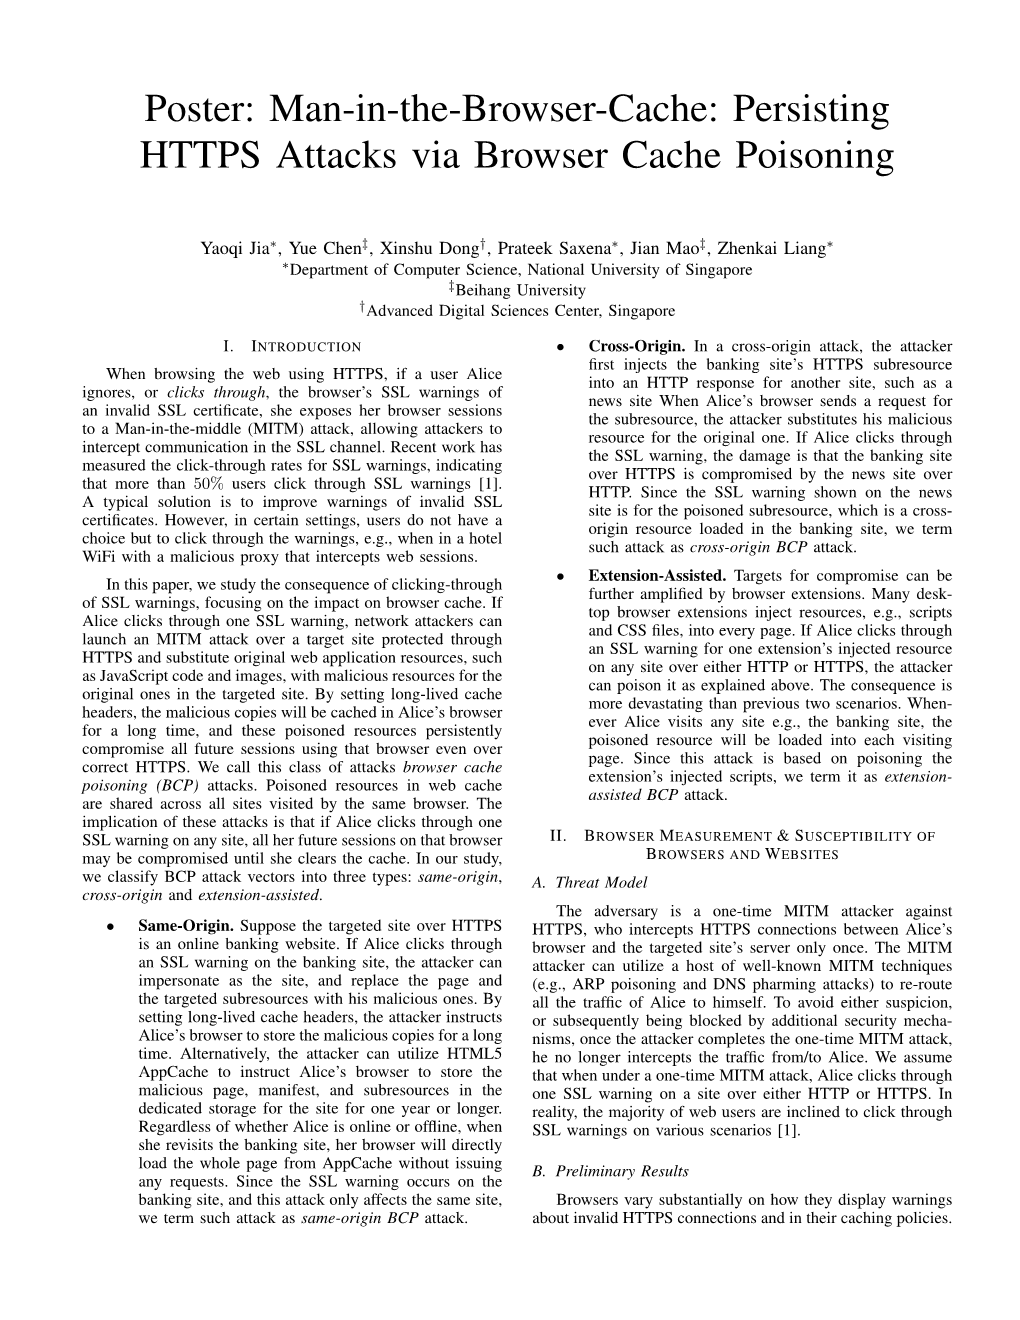 Poster: Man-In-The-Browser-Cache: Persisting HTTPS Attacks Via Browser Cache Poisoning